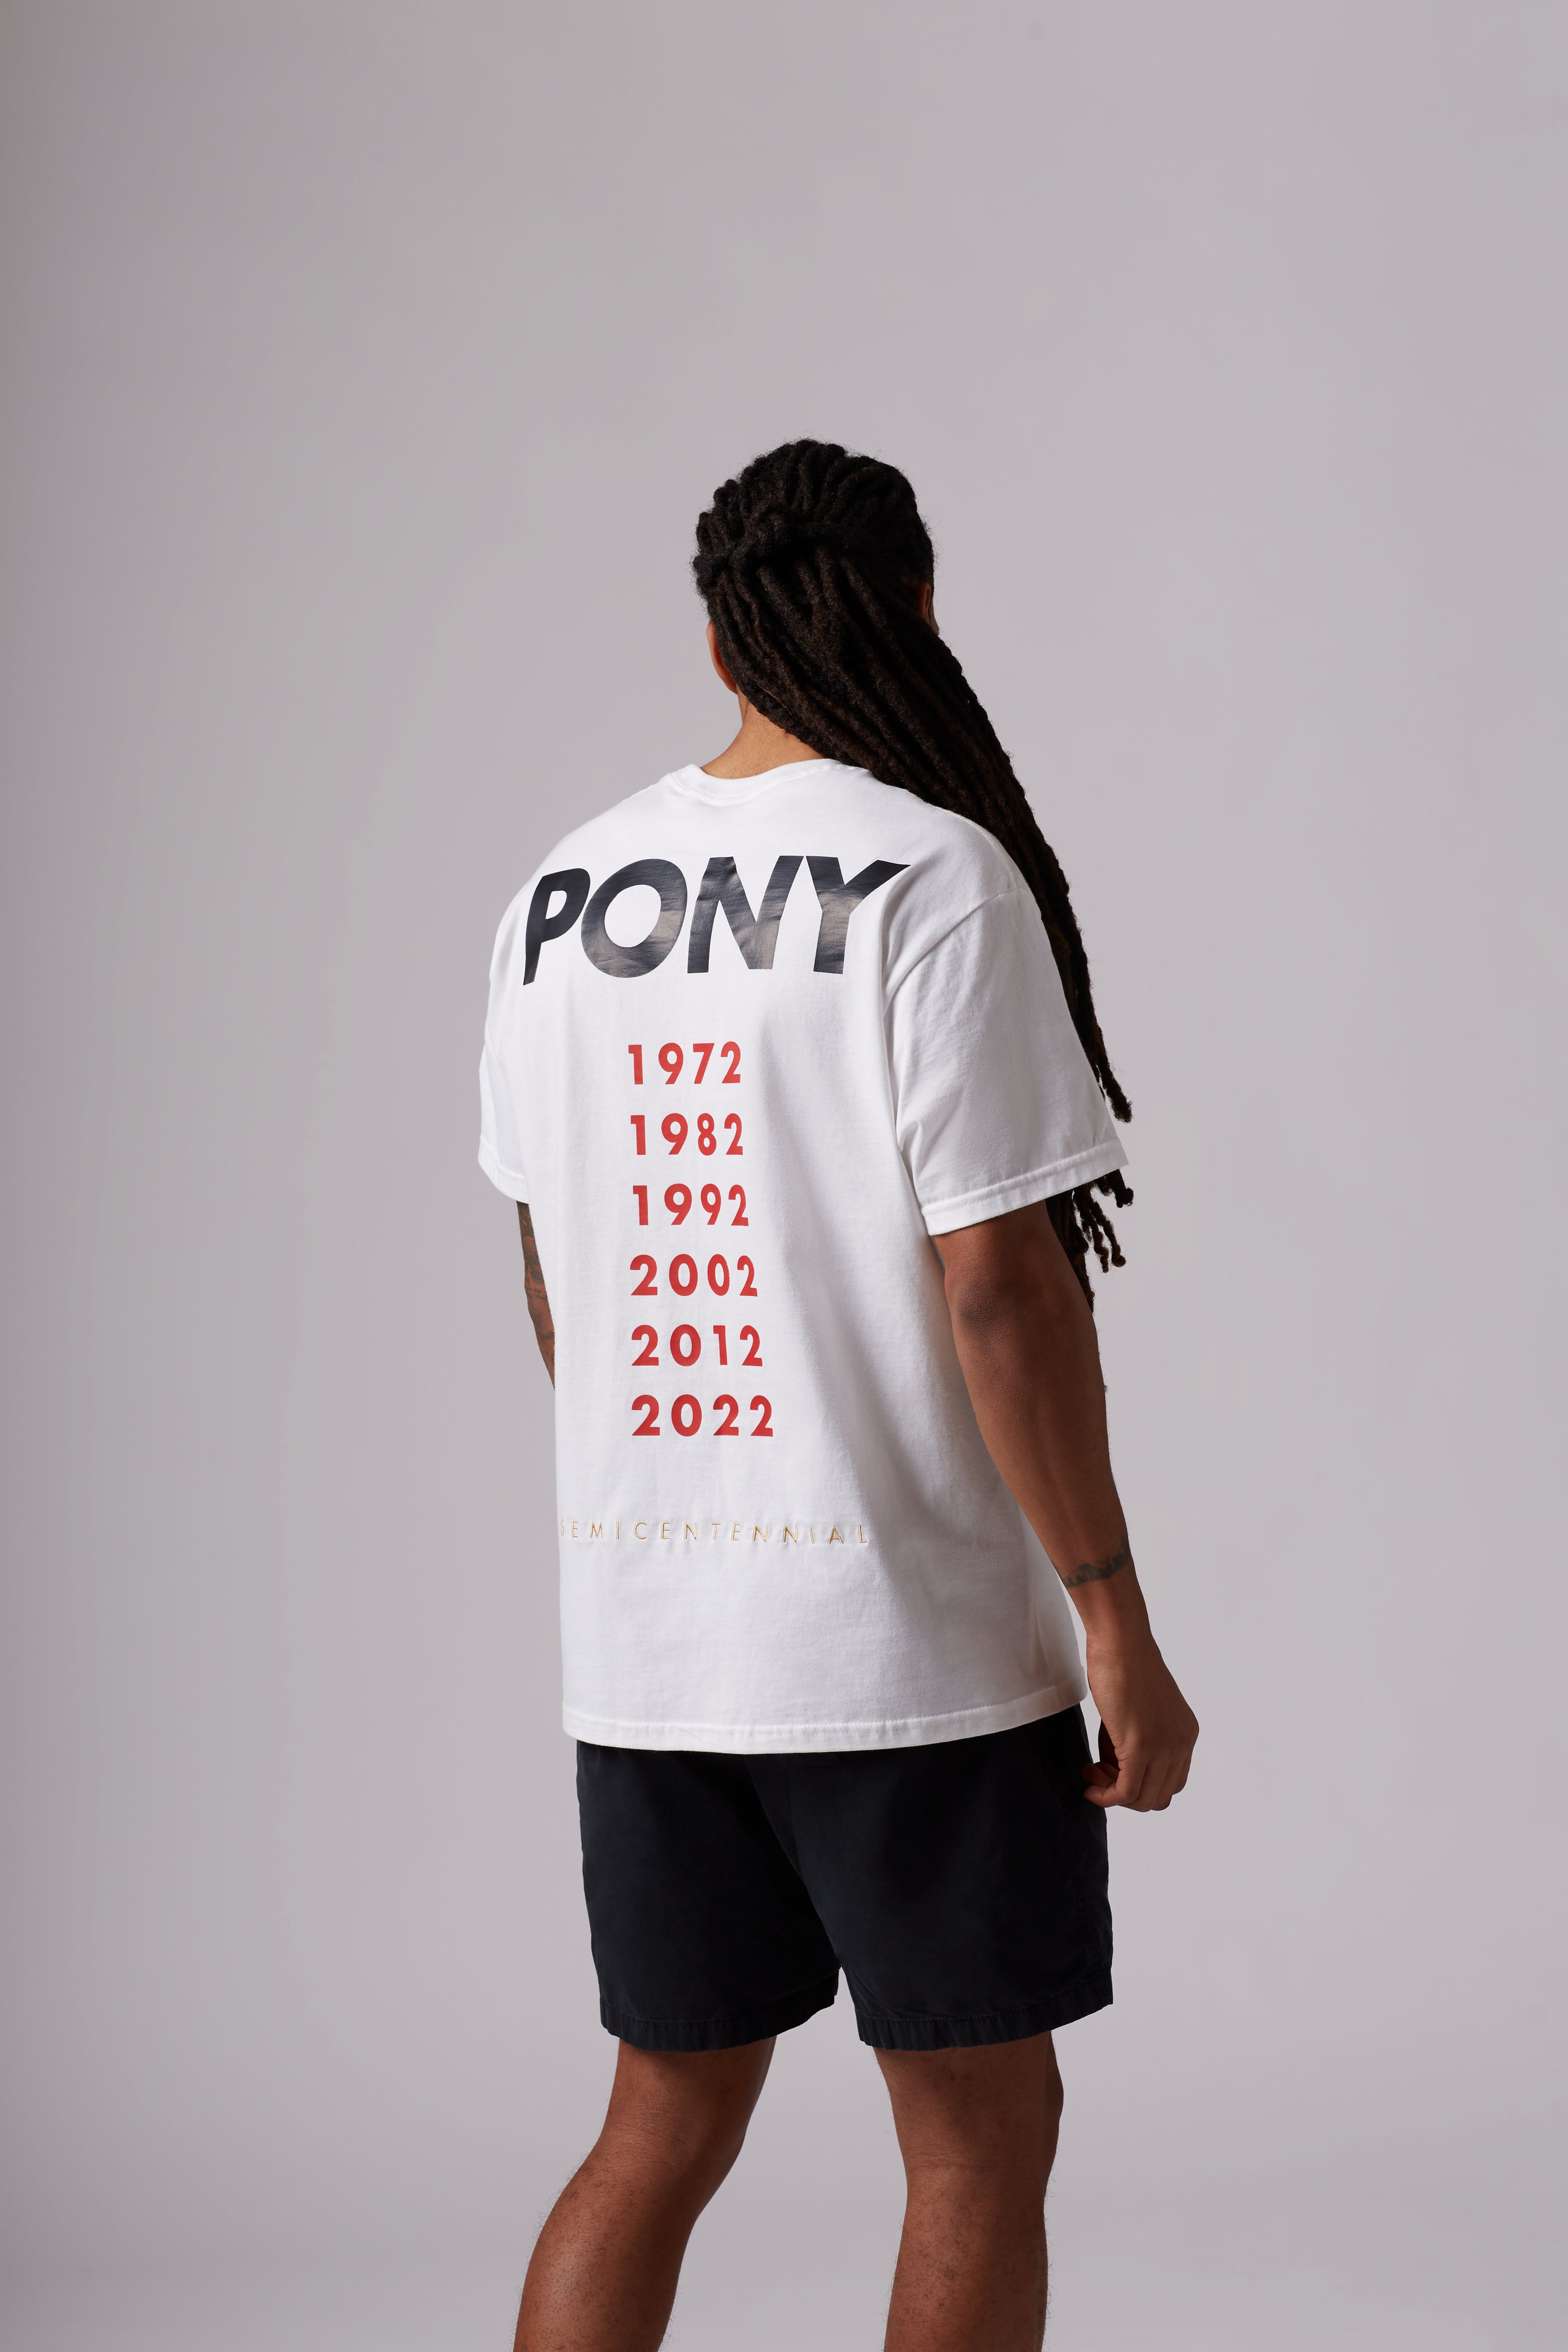 A back shot of the white semi centennial sports tee featuring a PONY word mark across the top and years printed in red below, Yellow embroidered "SEMICENTENNIAL" across the bottom.